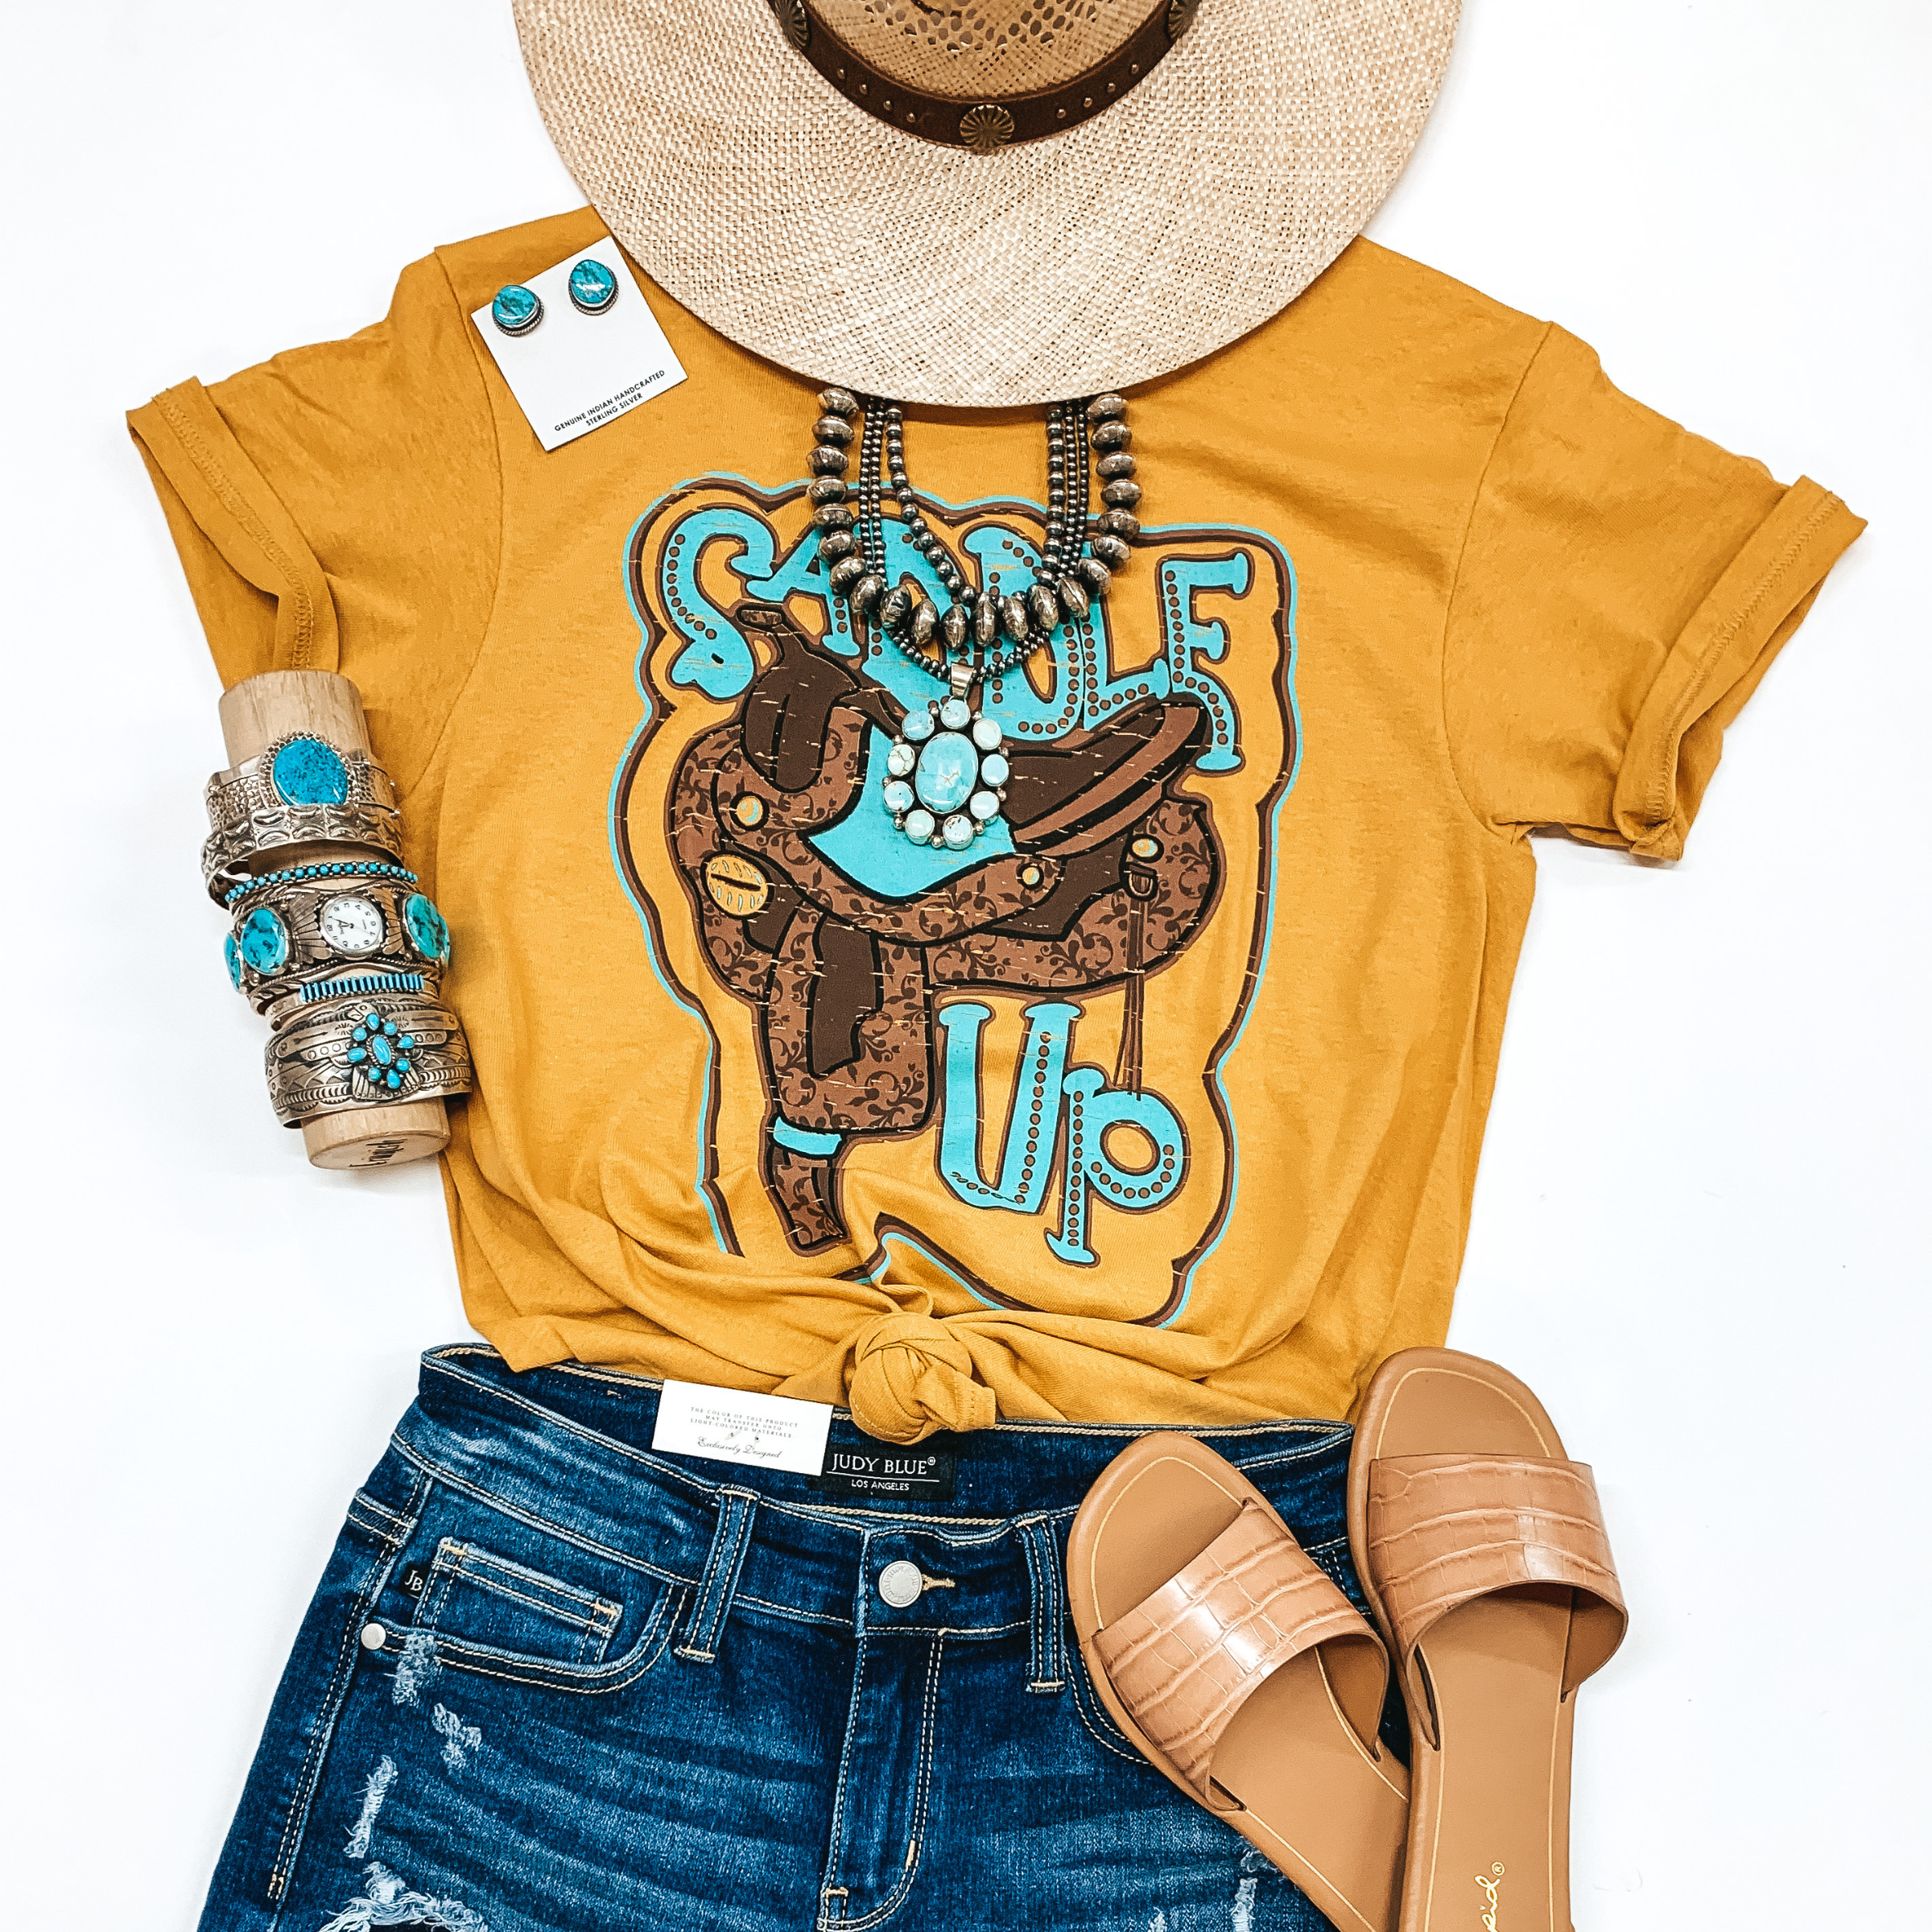 A mustard yellow graphic tee that says "Saddle Up". Pictured with genuine turquoise jewelry, a straw hat, denim shorts, and tan sandals.